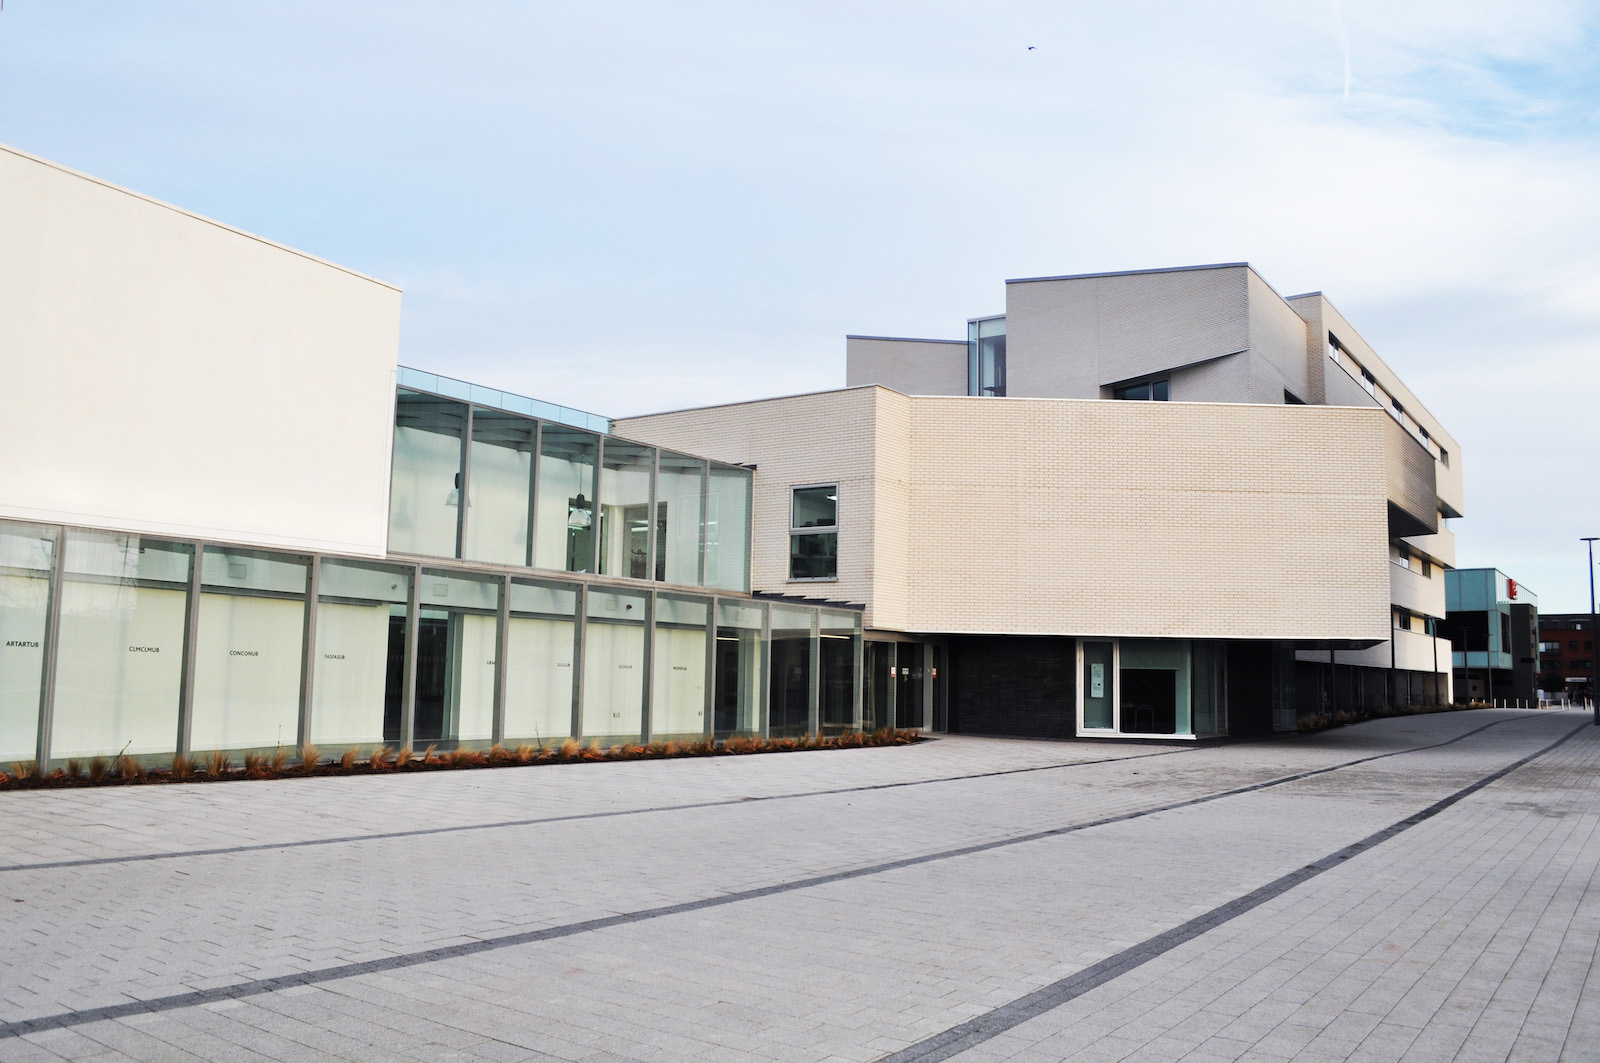 external view of the minimal art architecture design building of the university of lincoln